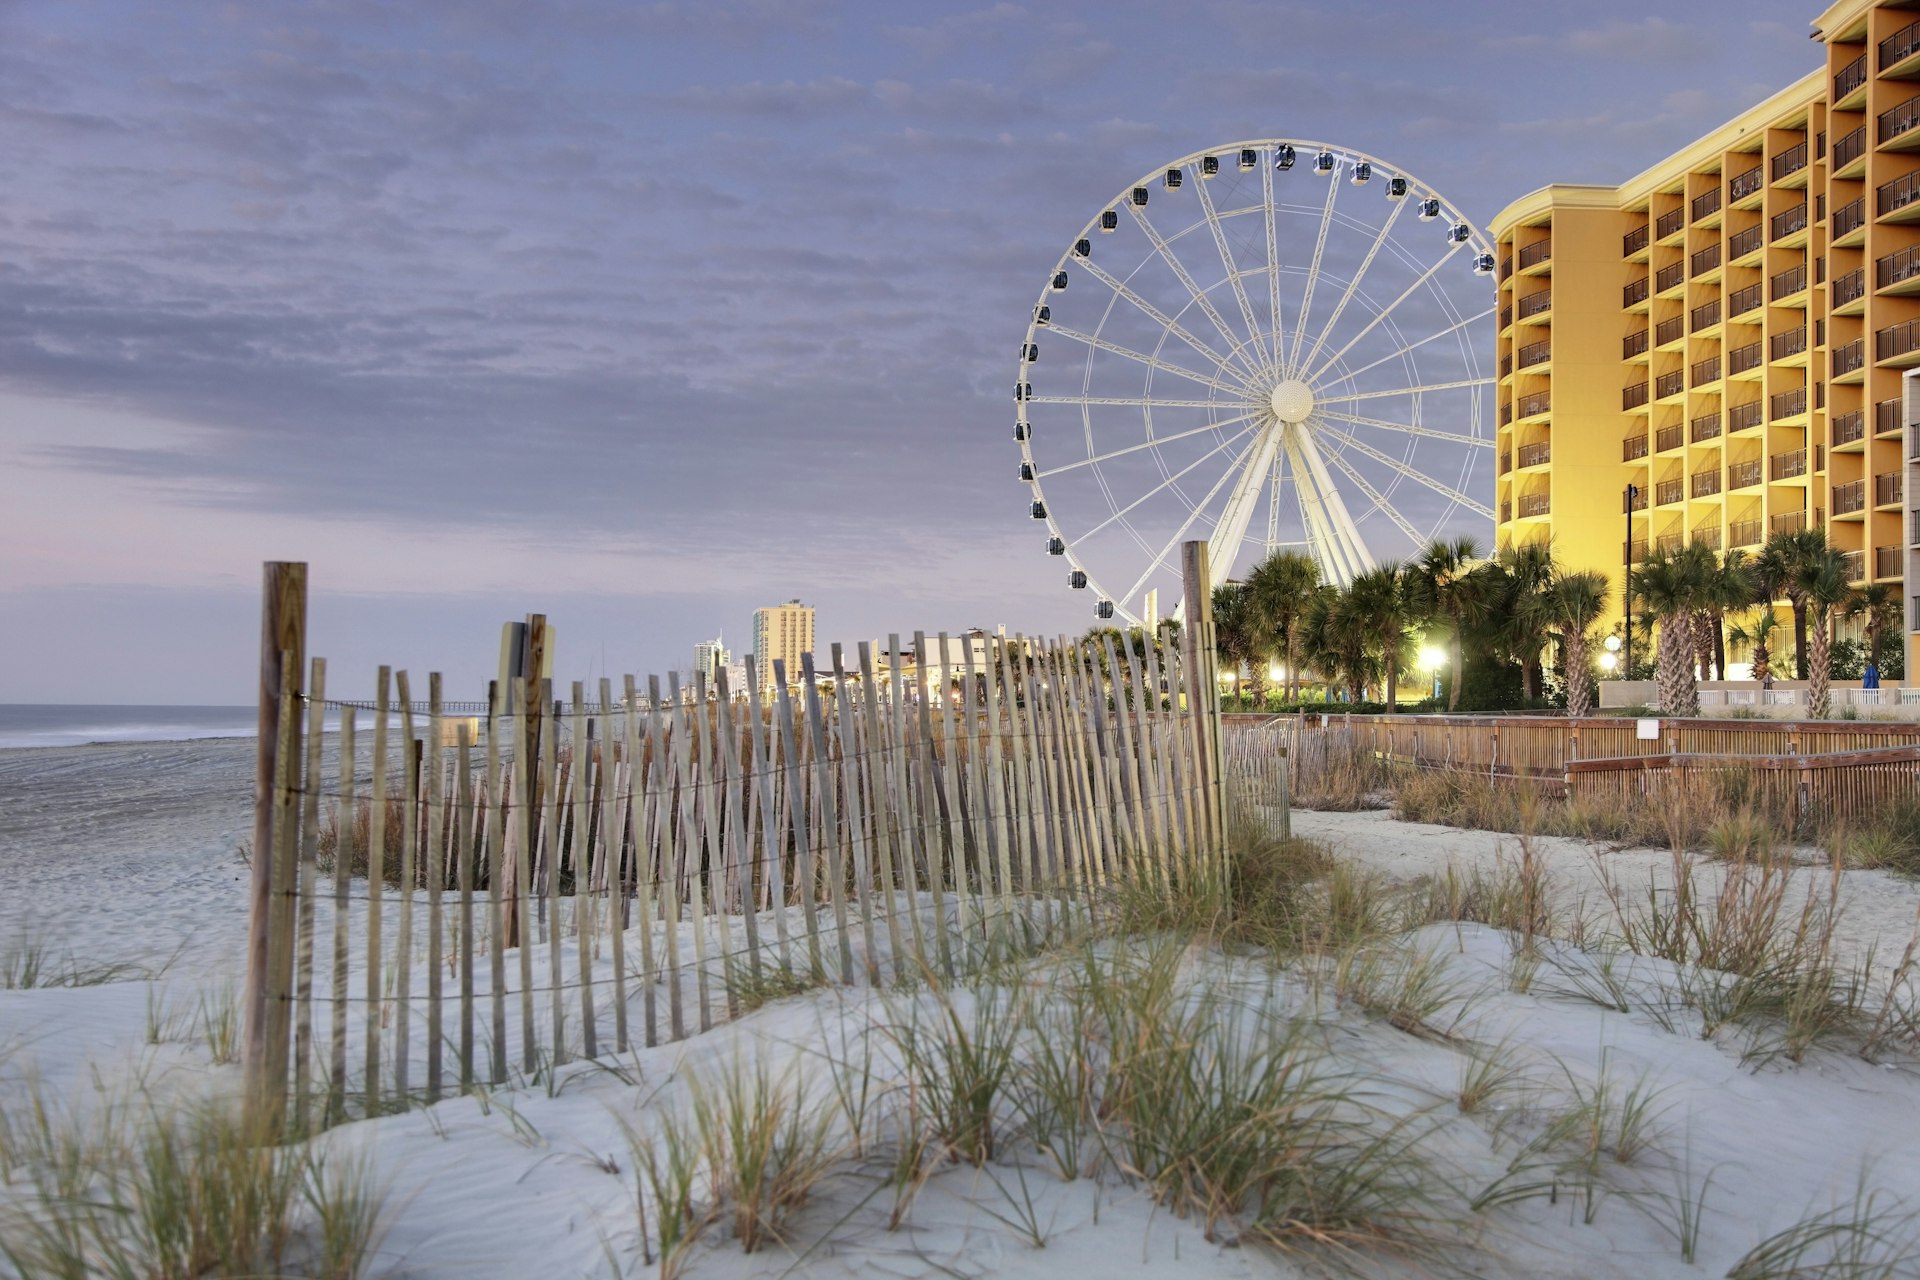 A fence in the dunes along the Boardwalk of Myrtle Beach at dusk, with the SkyWheel and apartment buildings in the distance